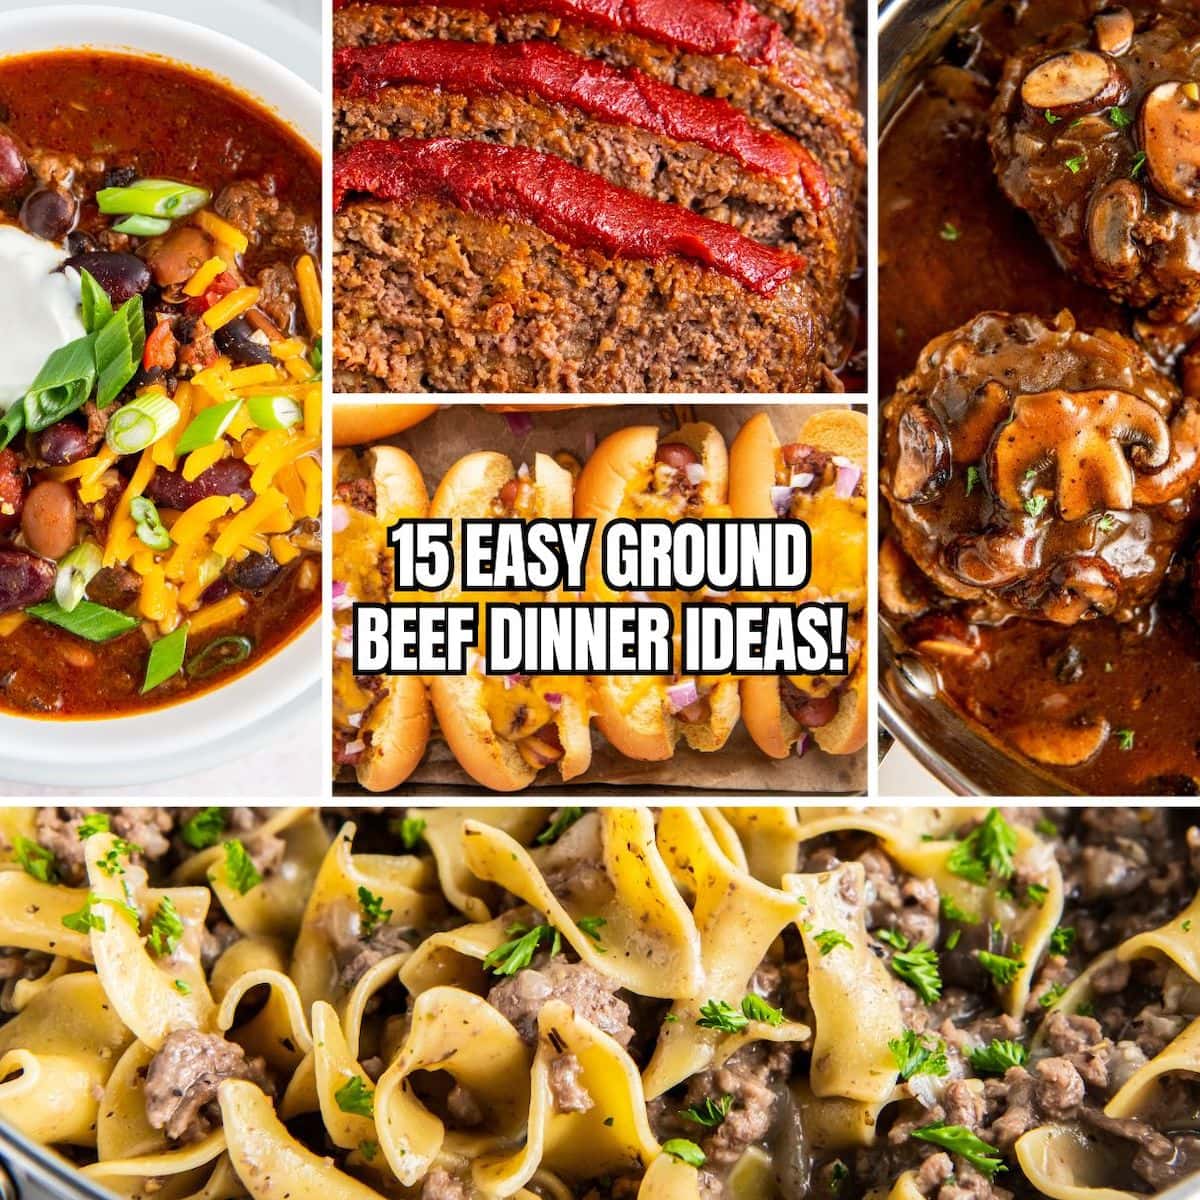 5 different easy ground beef dinner ideas collage image.